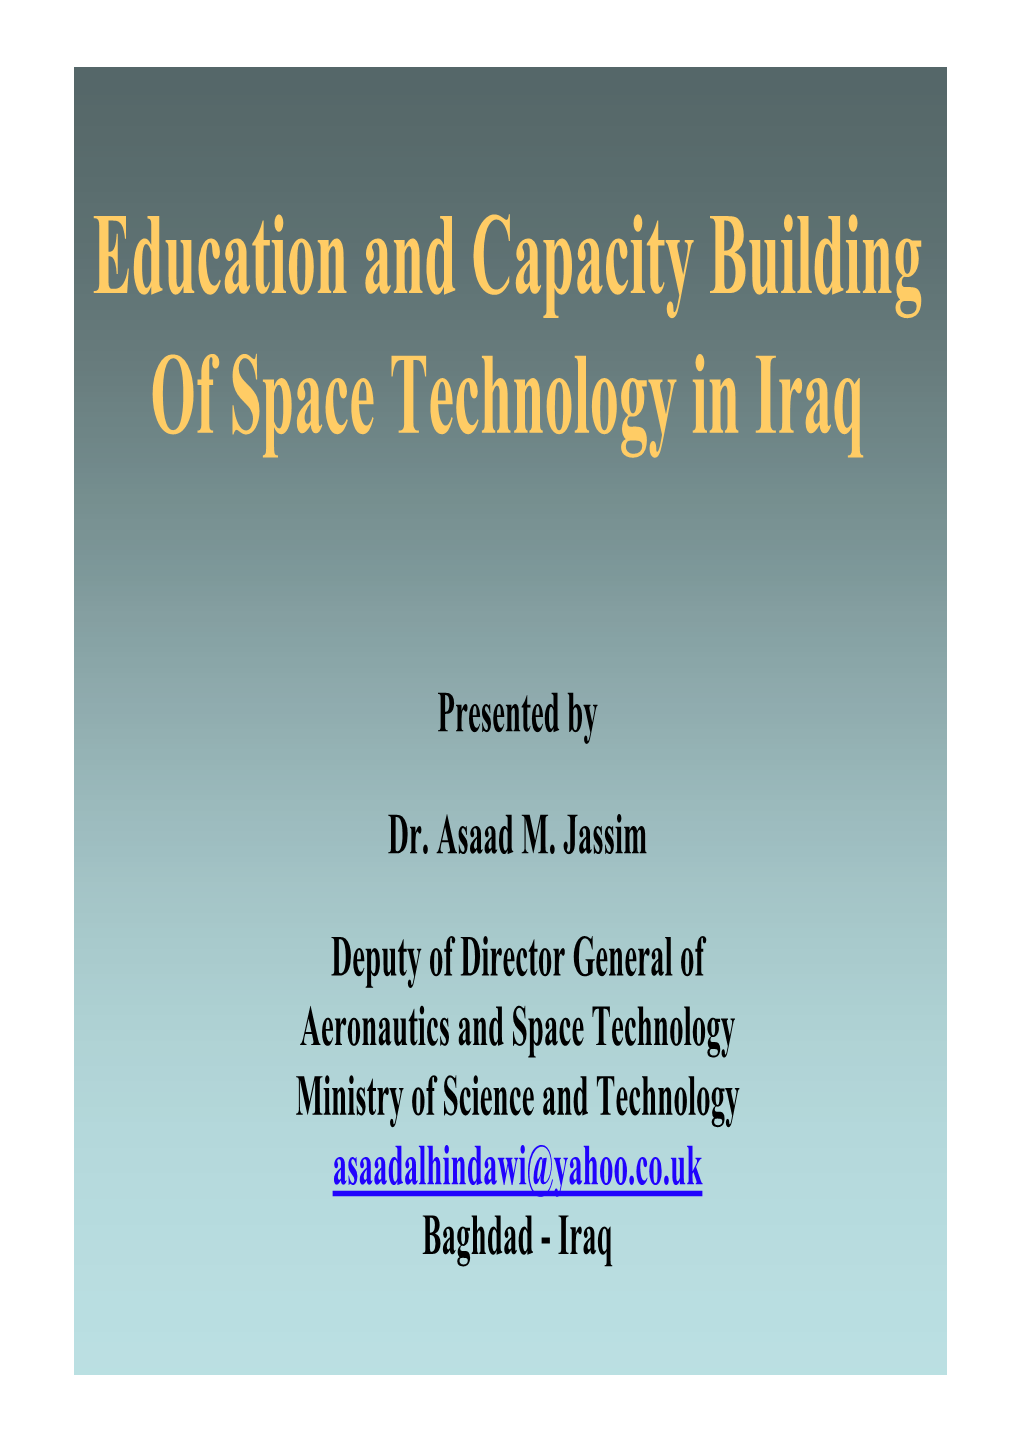 Education and Capacity Building of Space Technology in Iraq